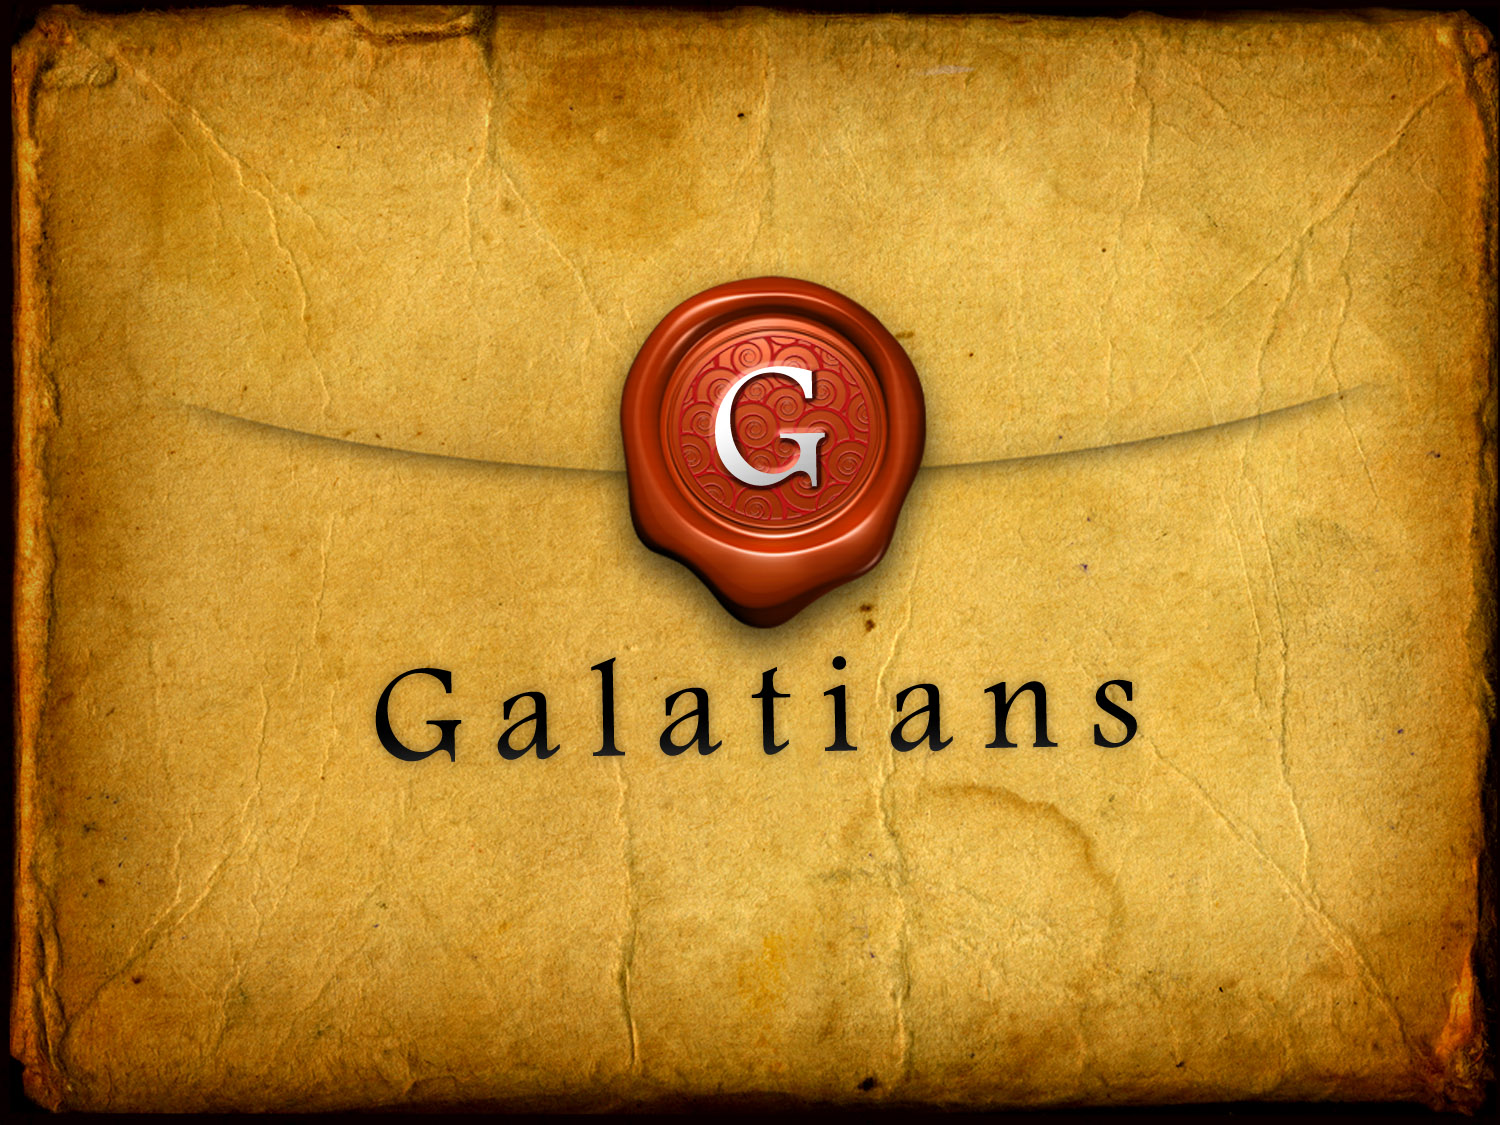 The Book of Galatians 2:6-10